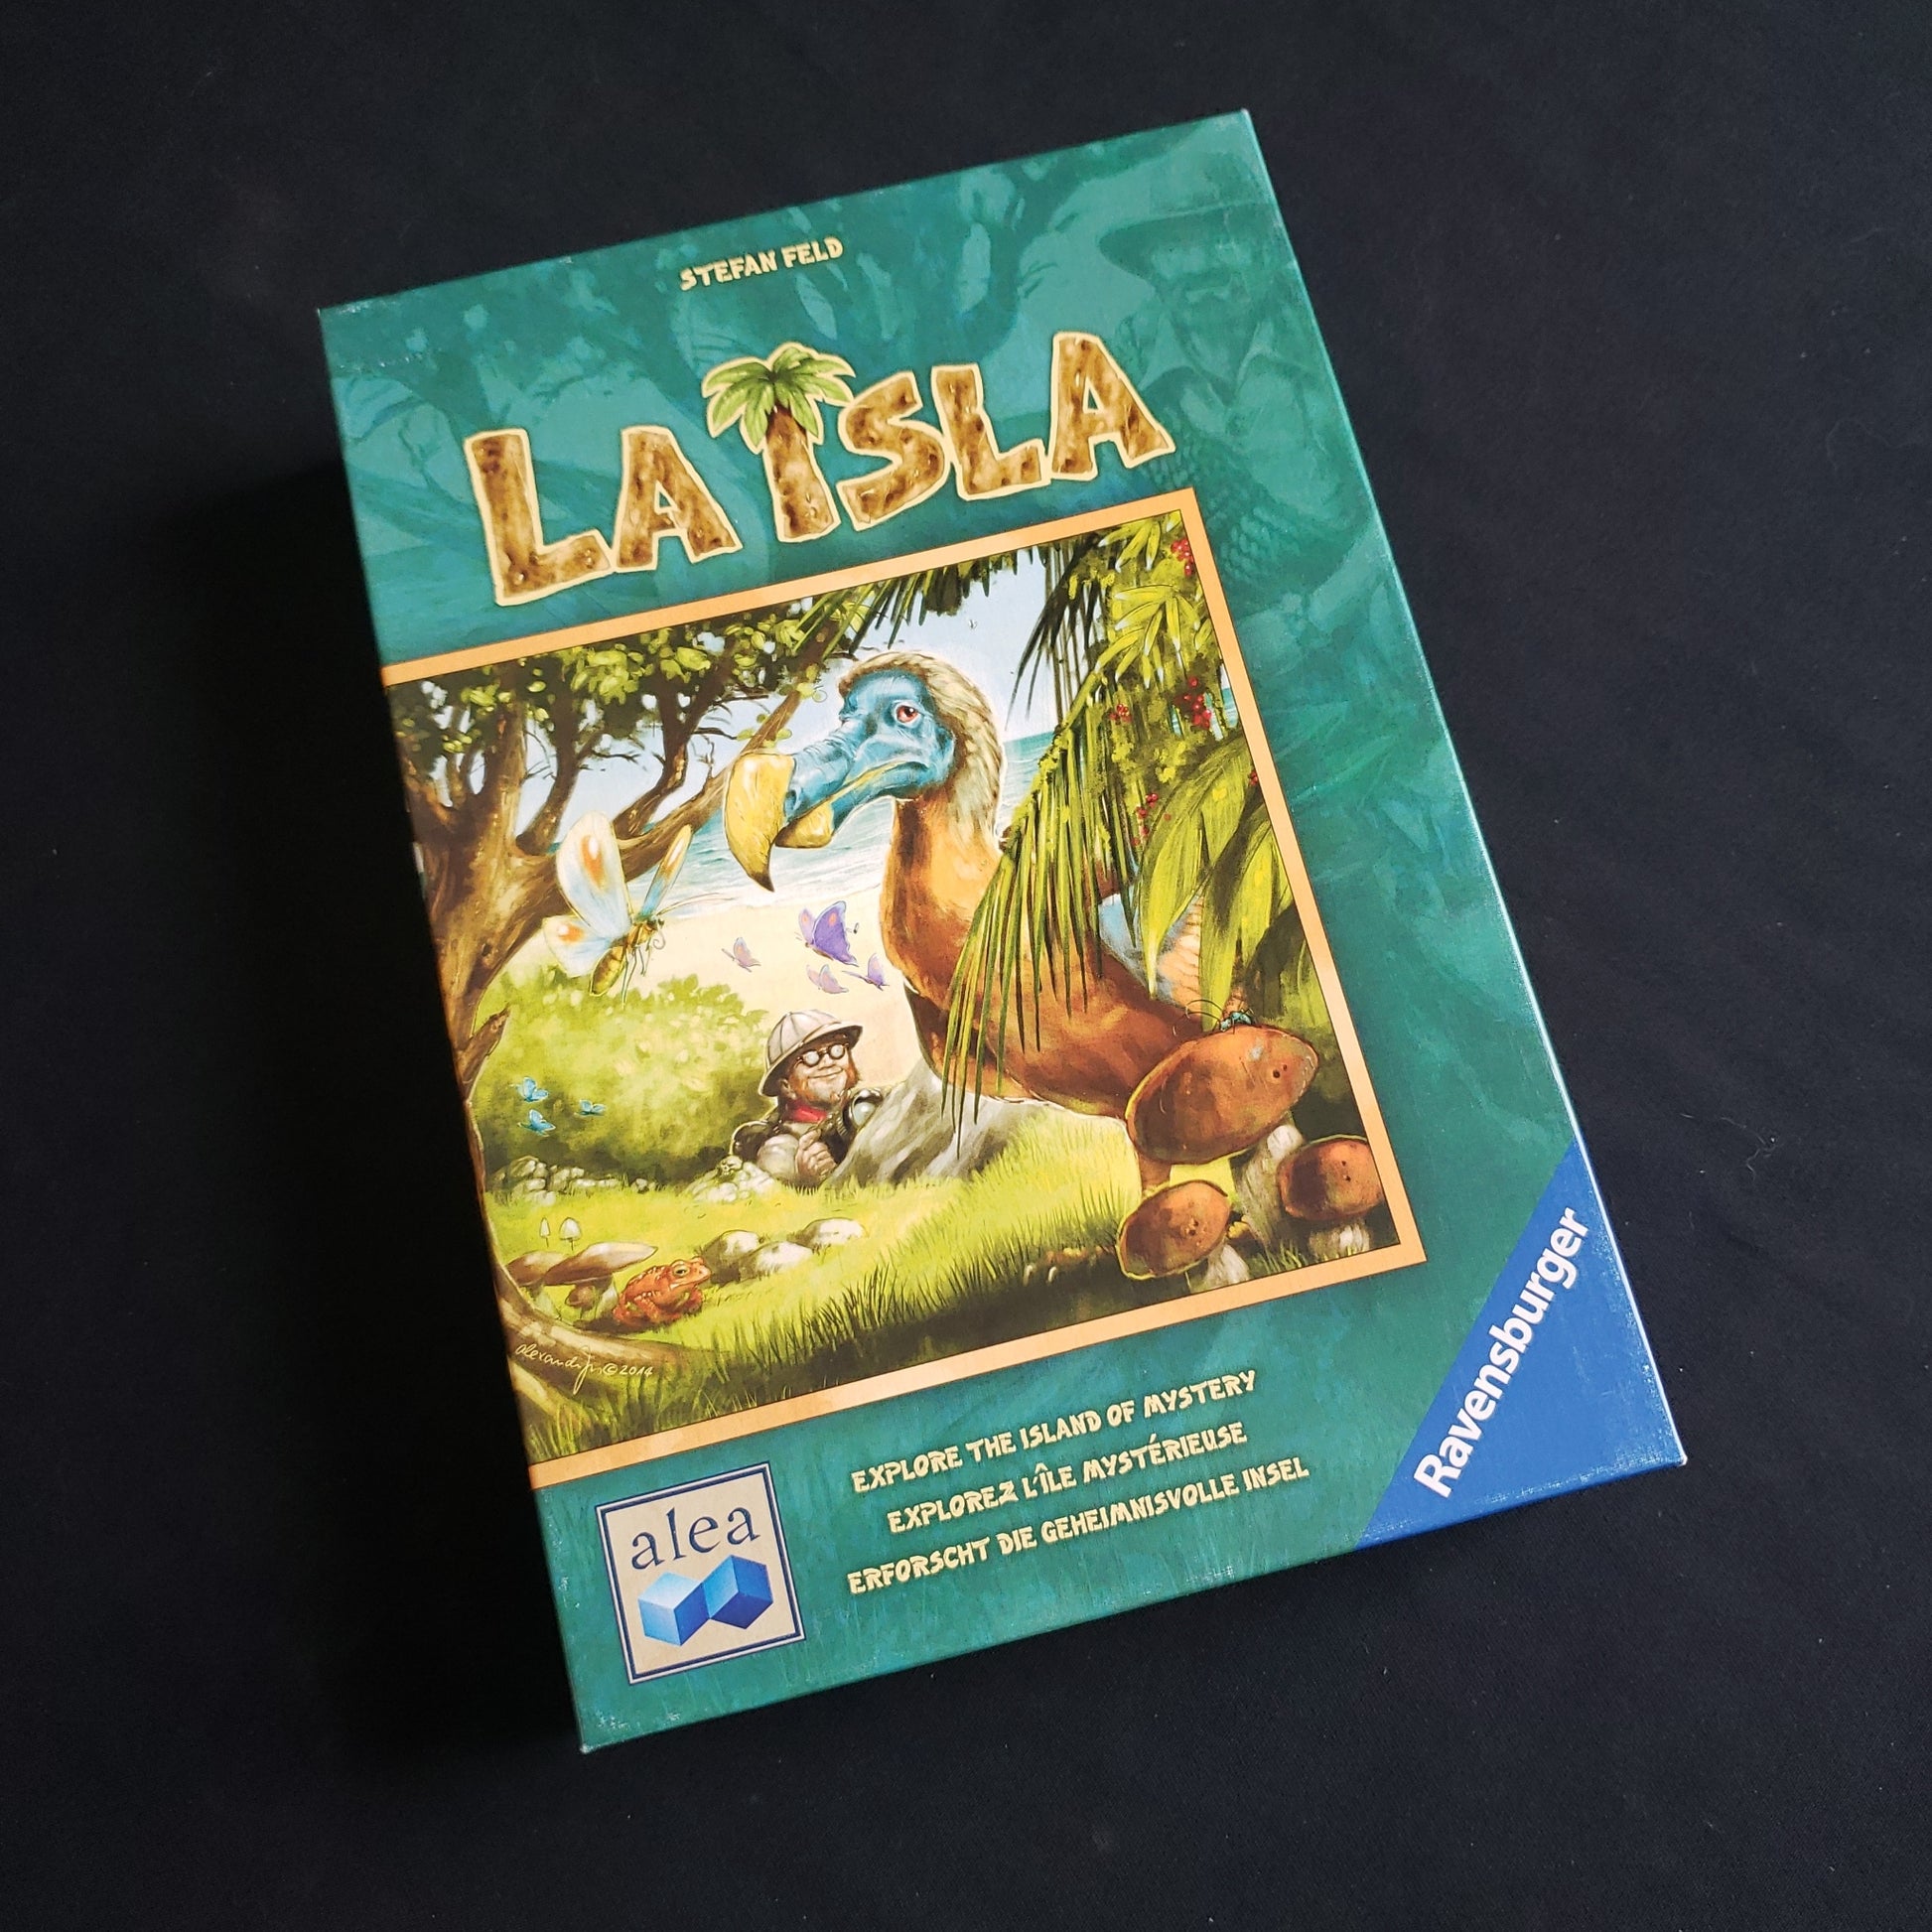 Image shows the front cover of the box of the La Isla board game